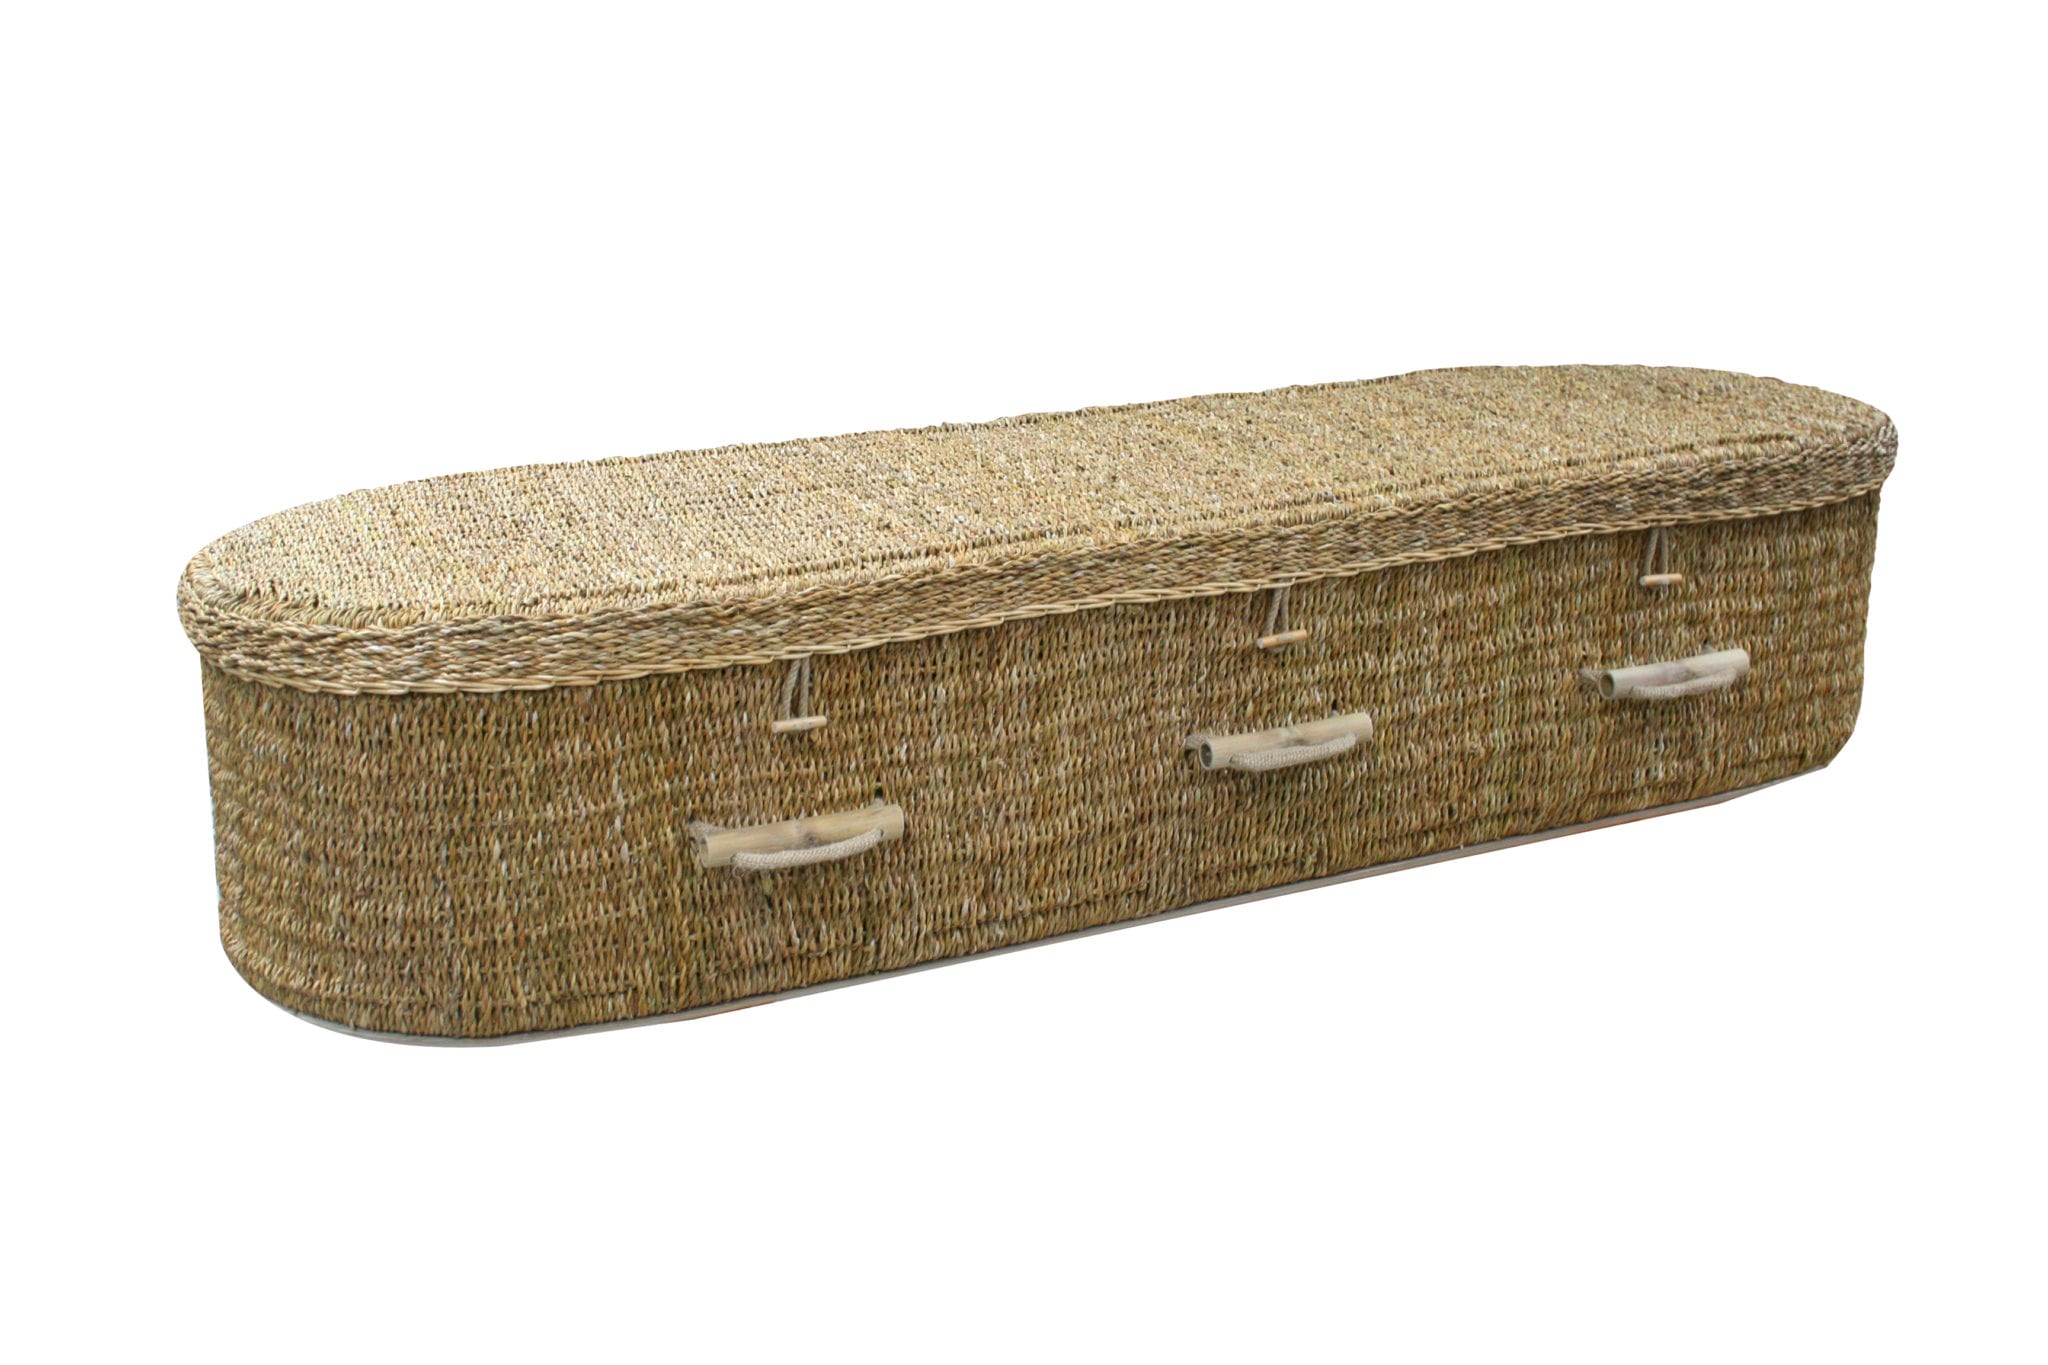 Basic range of coffins At T Allen the Seagrass Coffin with wooden handles and wooden tie downs